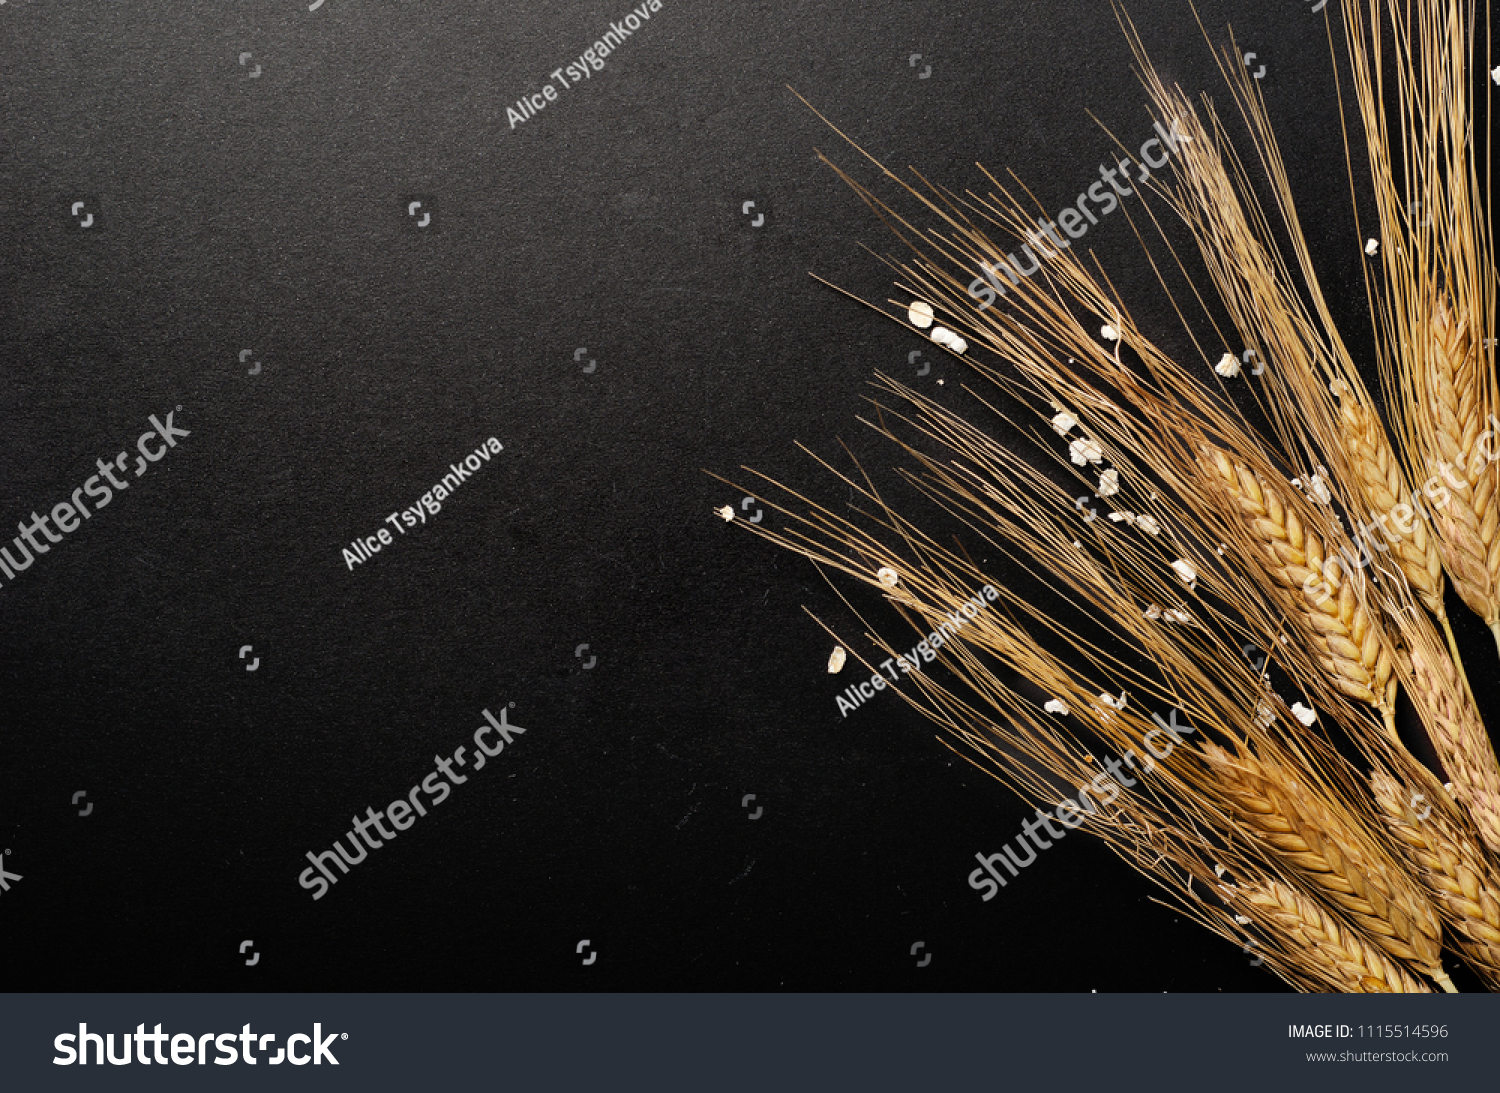 Dry ears of oats on a black background. Harvesting. Copy space #1115514596